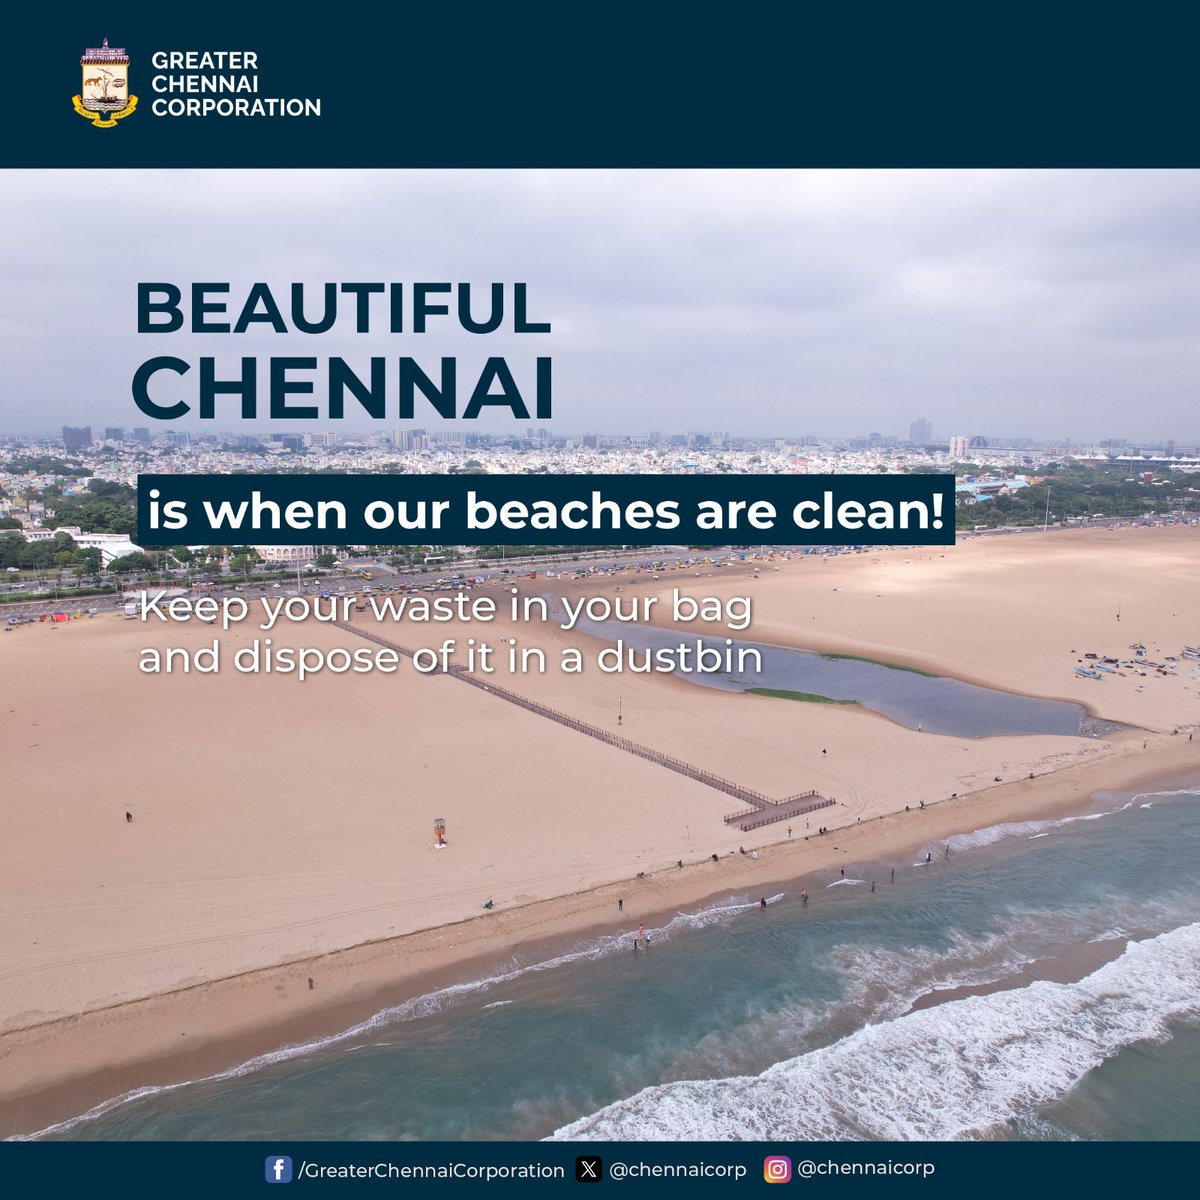 Dear #Chennaiites,

Let’s keep our beaches clean! Remember to take your waste with you and dispose of it in a dustbin. Help protect our beautiful coastline.

@RAKRI1 
#ChennaiCorporation
#HeretoServe